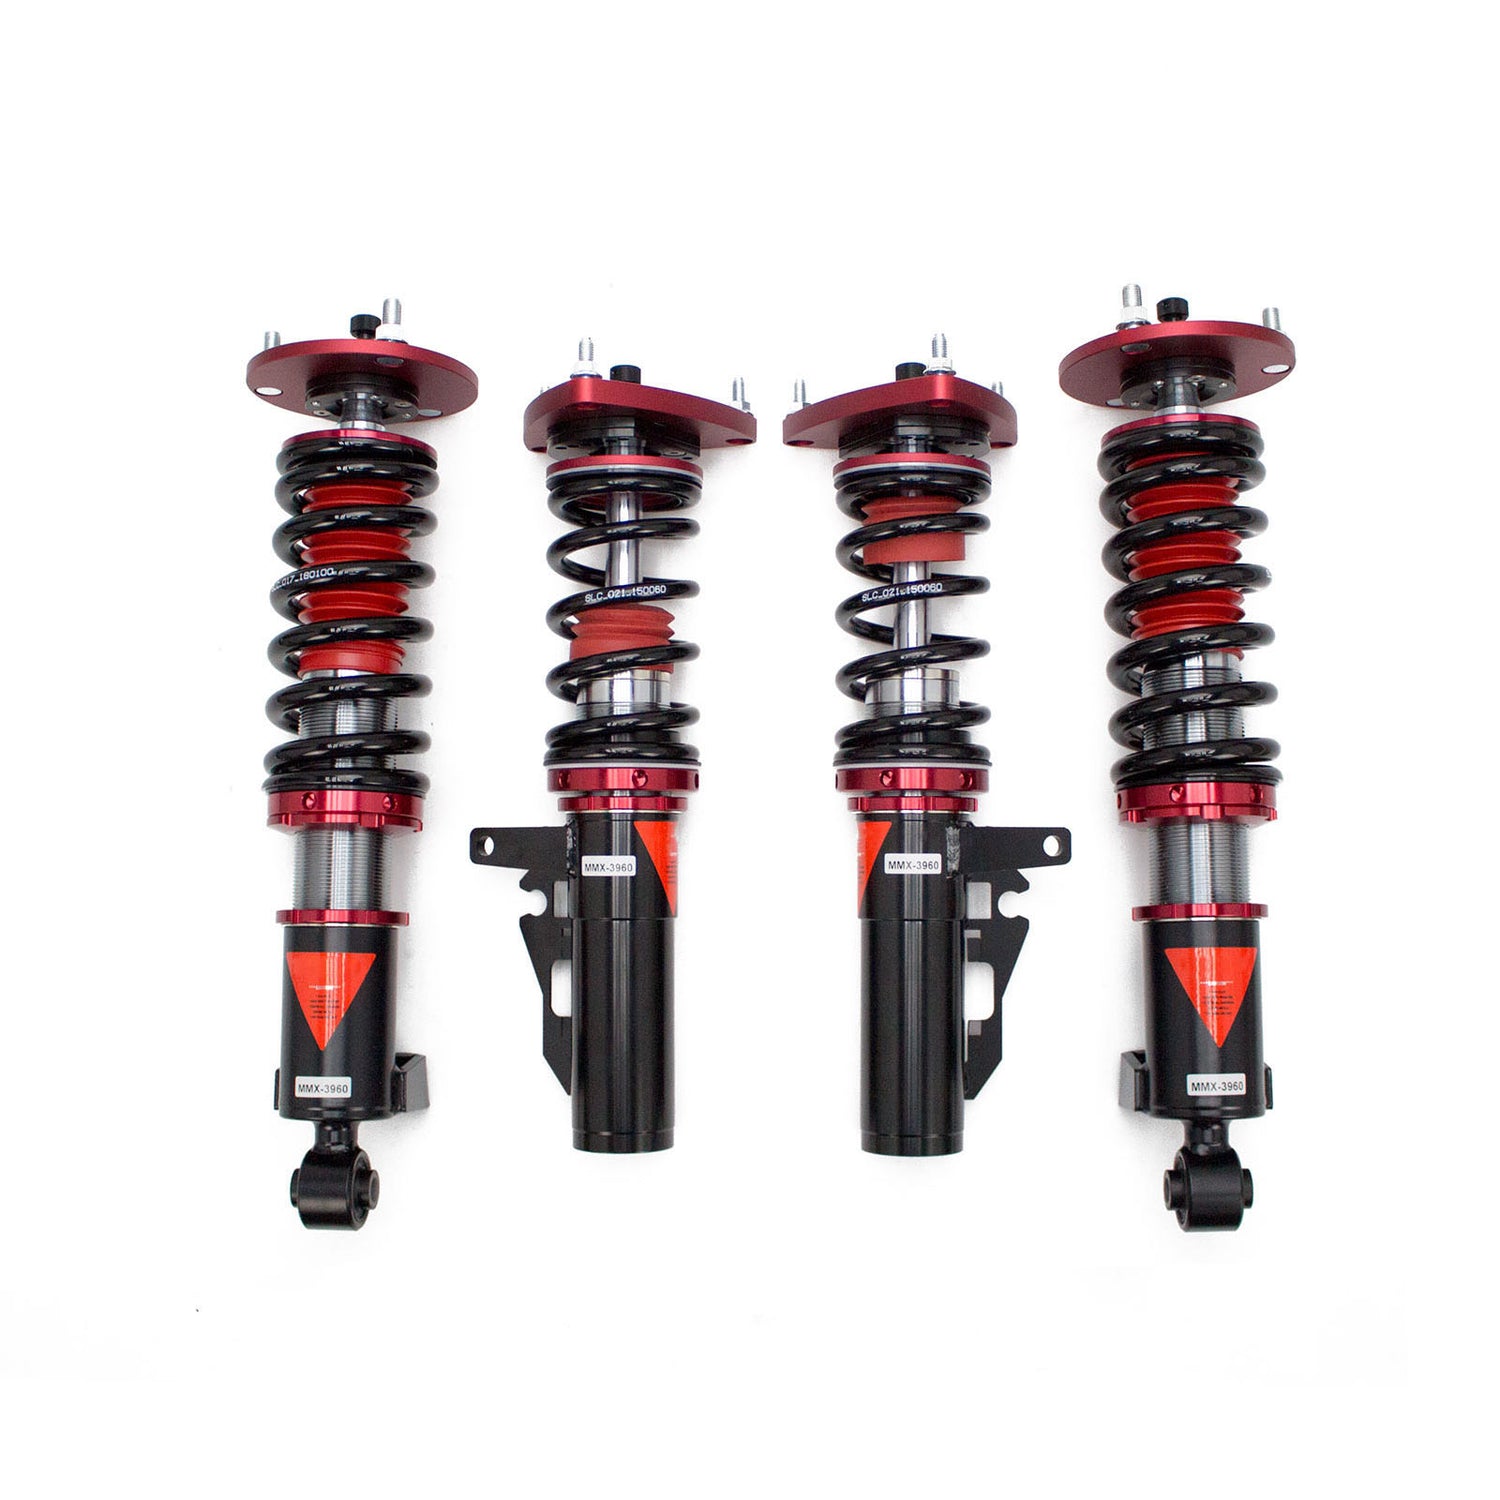 MMX3960 MAXX Coilovers Lowering Kit, Fully Adjustable, Ride Height, 40 Clicks Rebound Settings, Porsche 911(996) Turbo/Carrera 4/Carrera 4S 1998-05